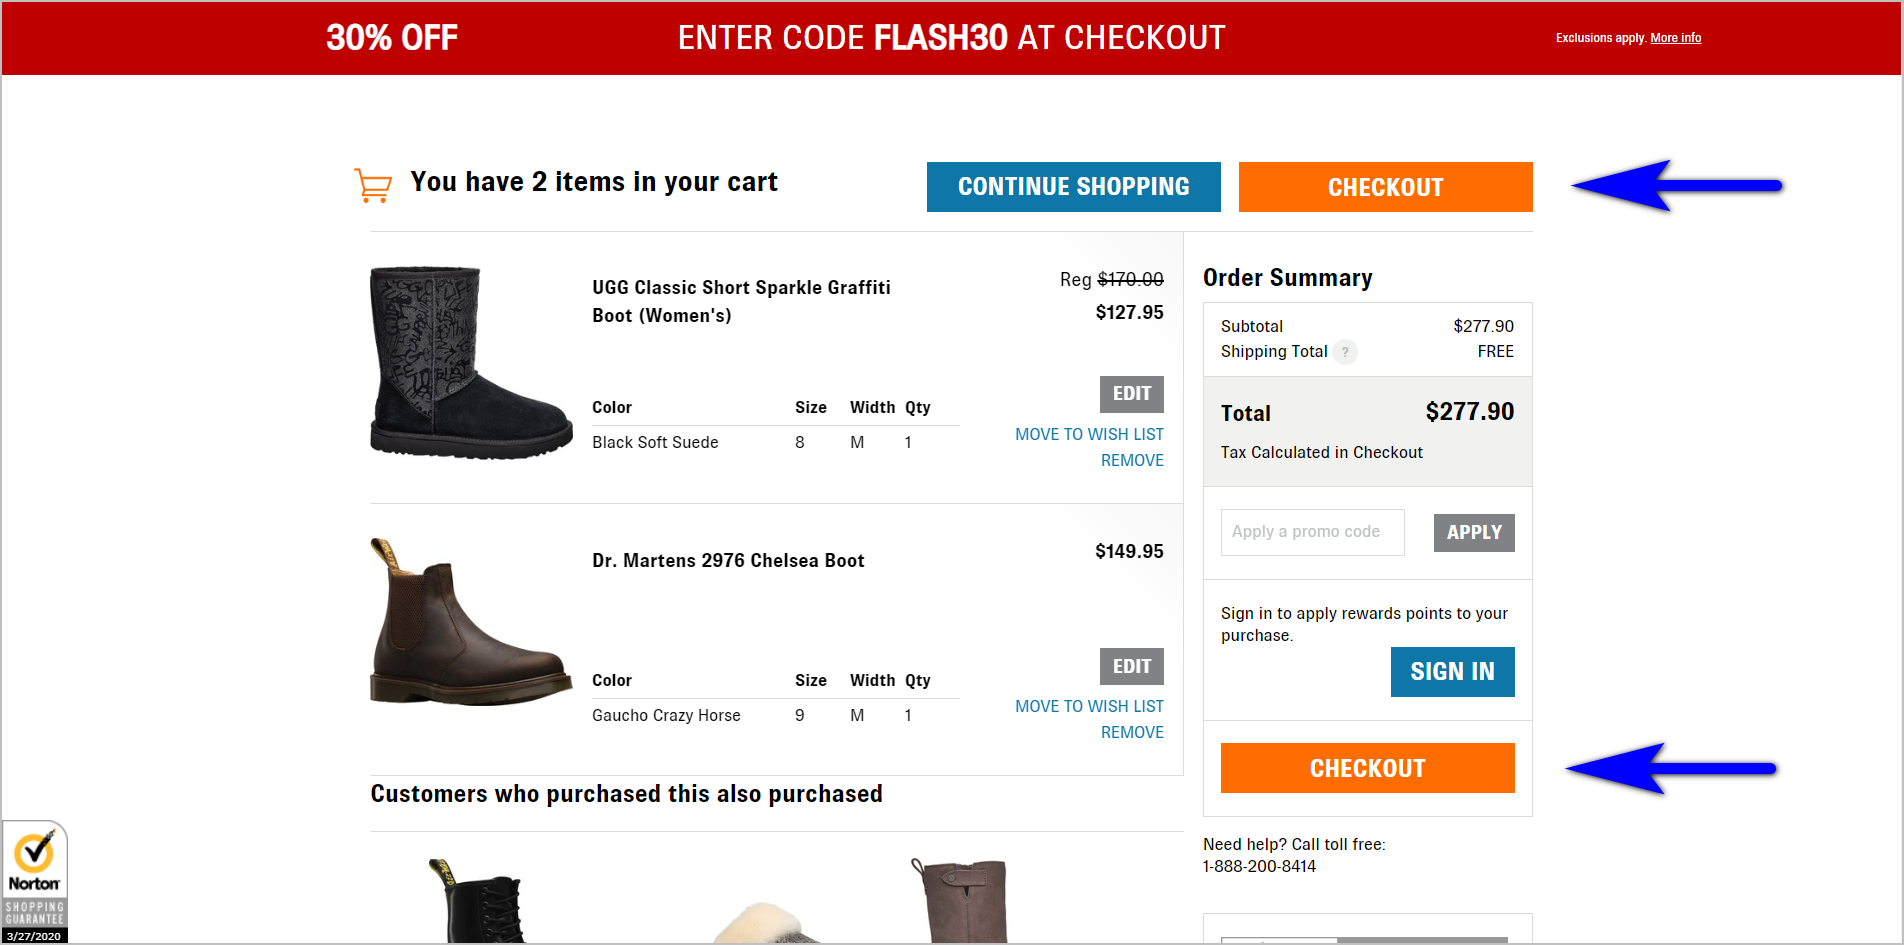 reducing motor load example - on the right side of shoes.com's shopping is an orange "checkout" button at the top beside a blue "continue shopping" button. below the "checkout" button is the order summary with the breakdwon of the total amount due. below the order summary is another orange "checkout" button